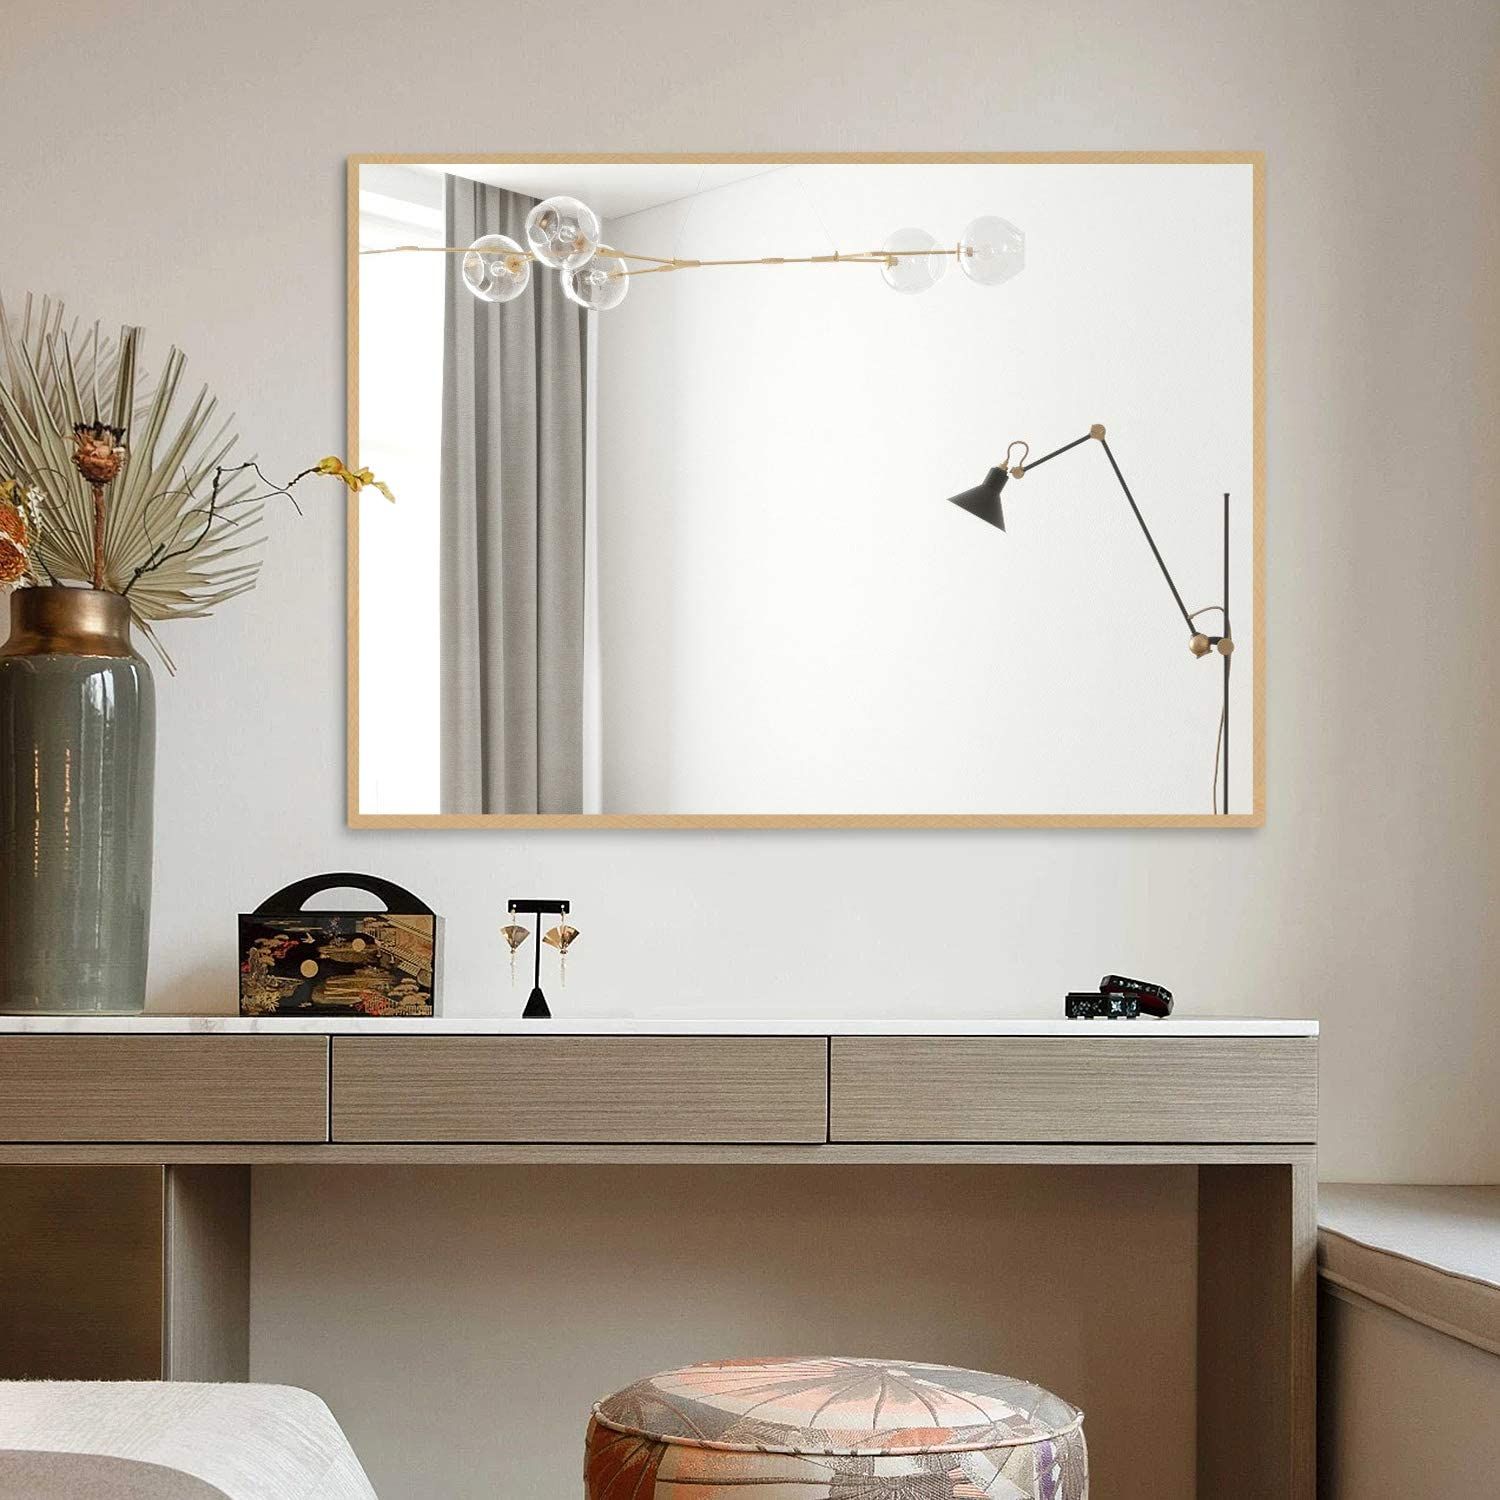 Mirrors For Wall Decor Rectangular Mirror Bathroom Wall Mounted Make Up Intended For Clear Wall Mirrors (View 2 of 15)